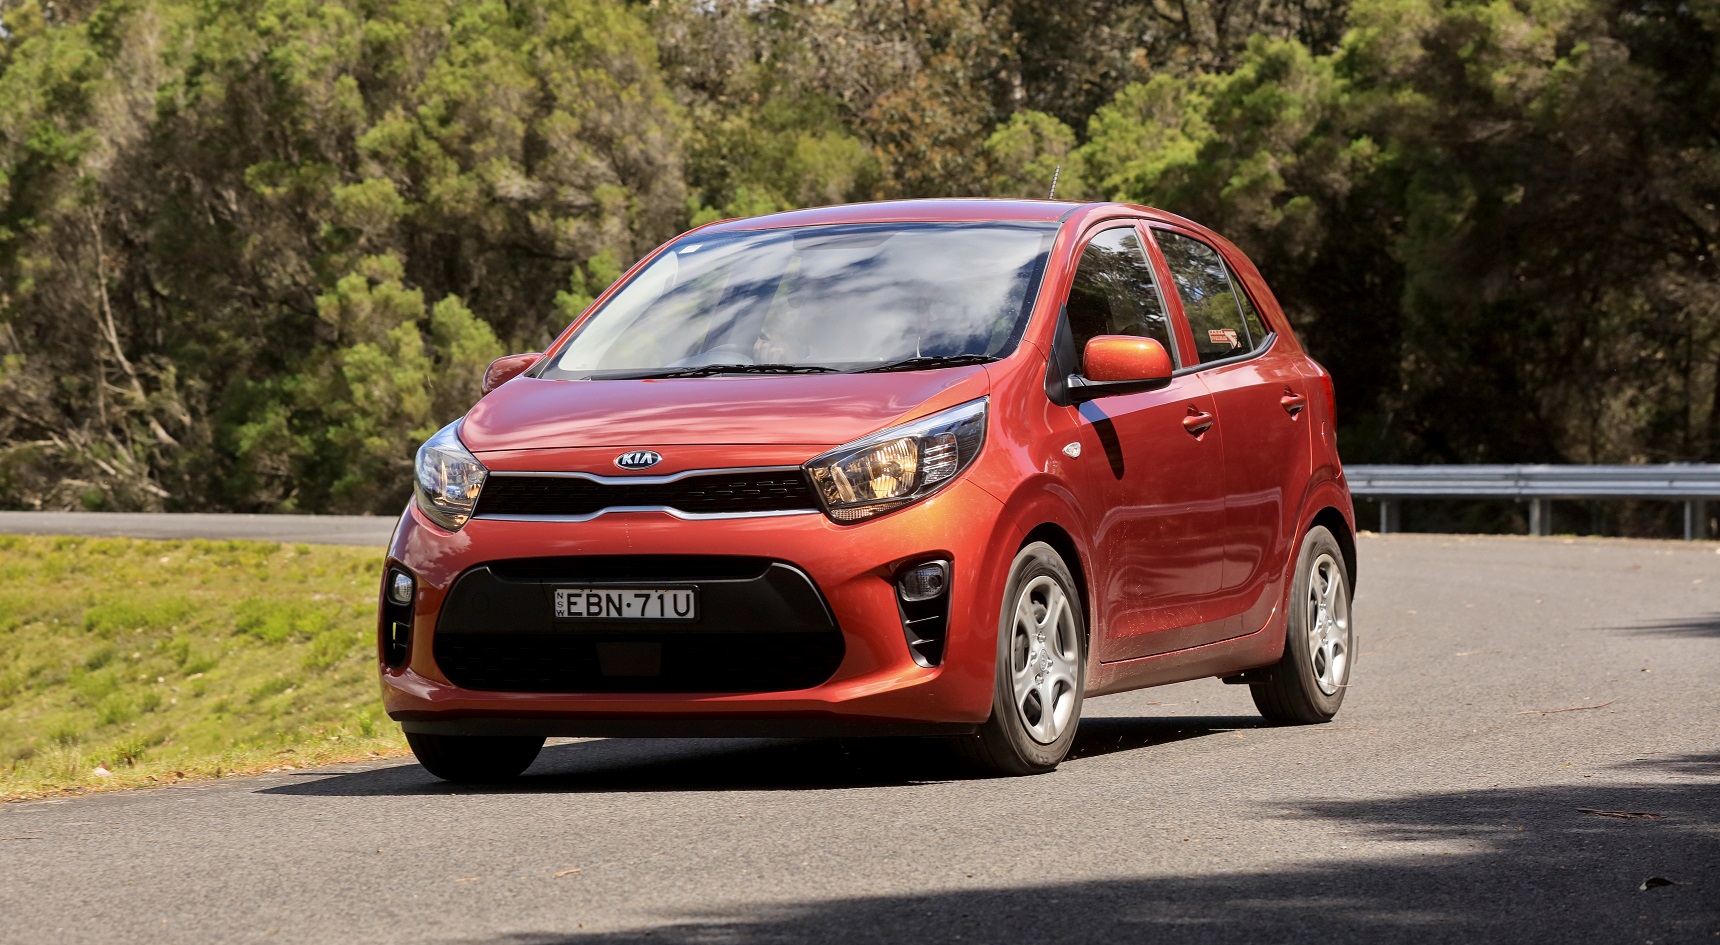 The Picanto S costs just $16,790.